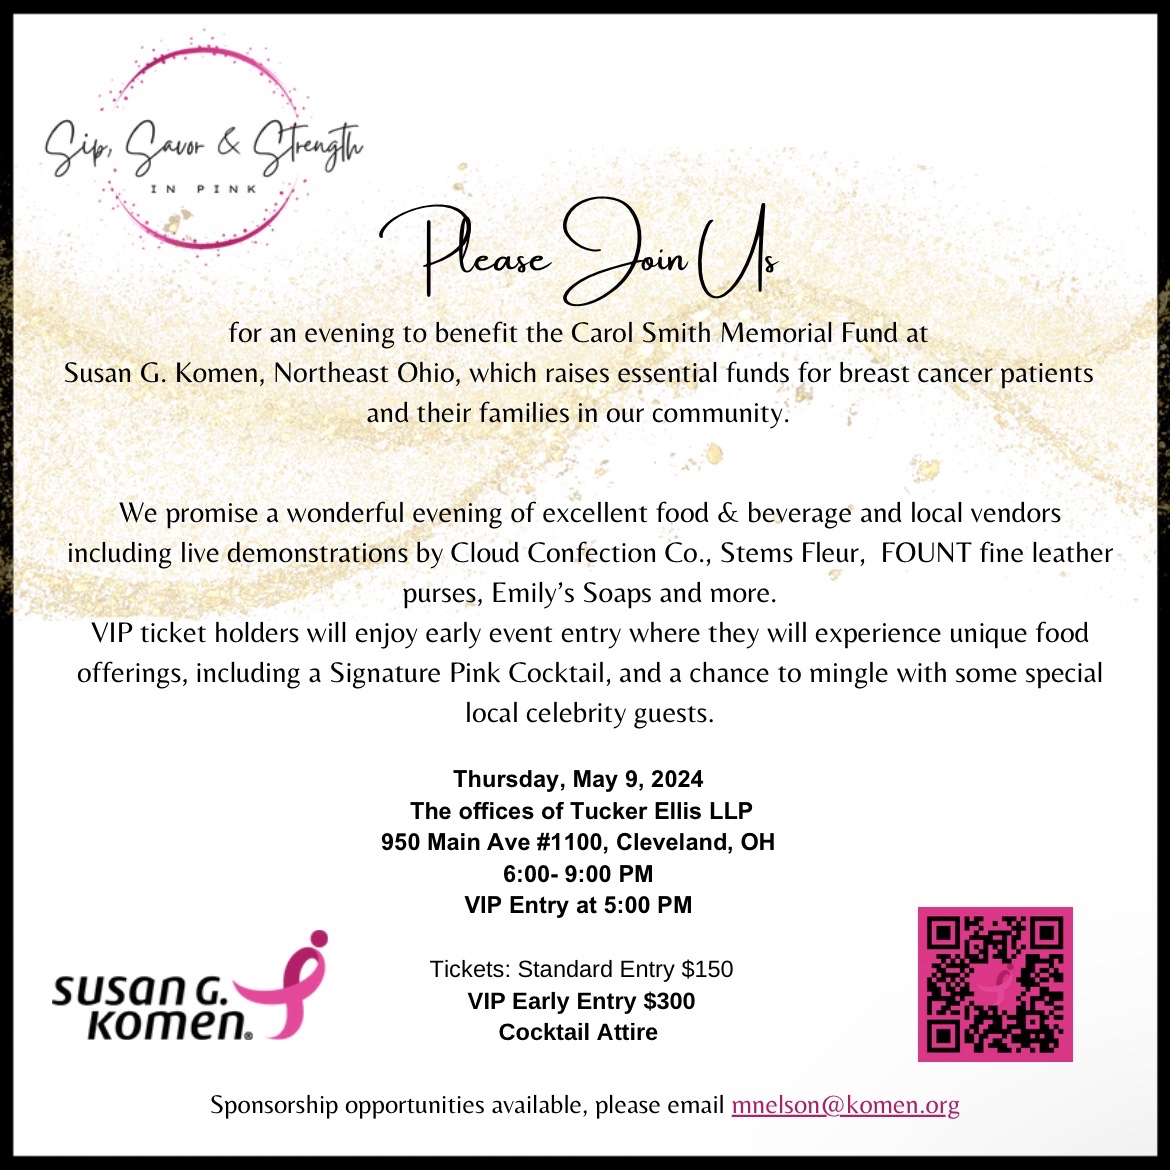 Grateful to be an invited speaker at the 2nd annual @SusanGKomen Northeast Ohio “Sip, Savor & Strength in Pink” event supporting the Carol Smith Memorial Fund for #BreastCancer hosted by @fox8news anchor @NatalieHerbick! Come join us on 5/9/24! #NAVAH #RadOnc #KillCancer #bcsm